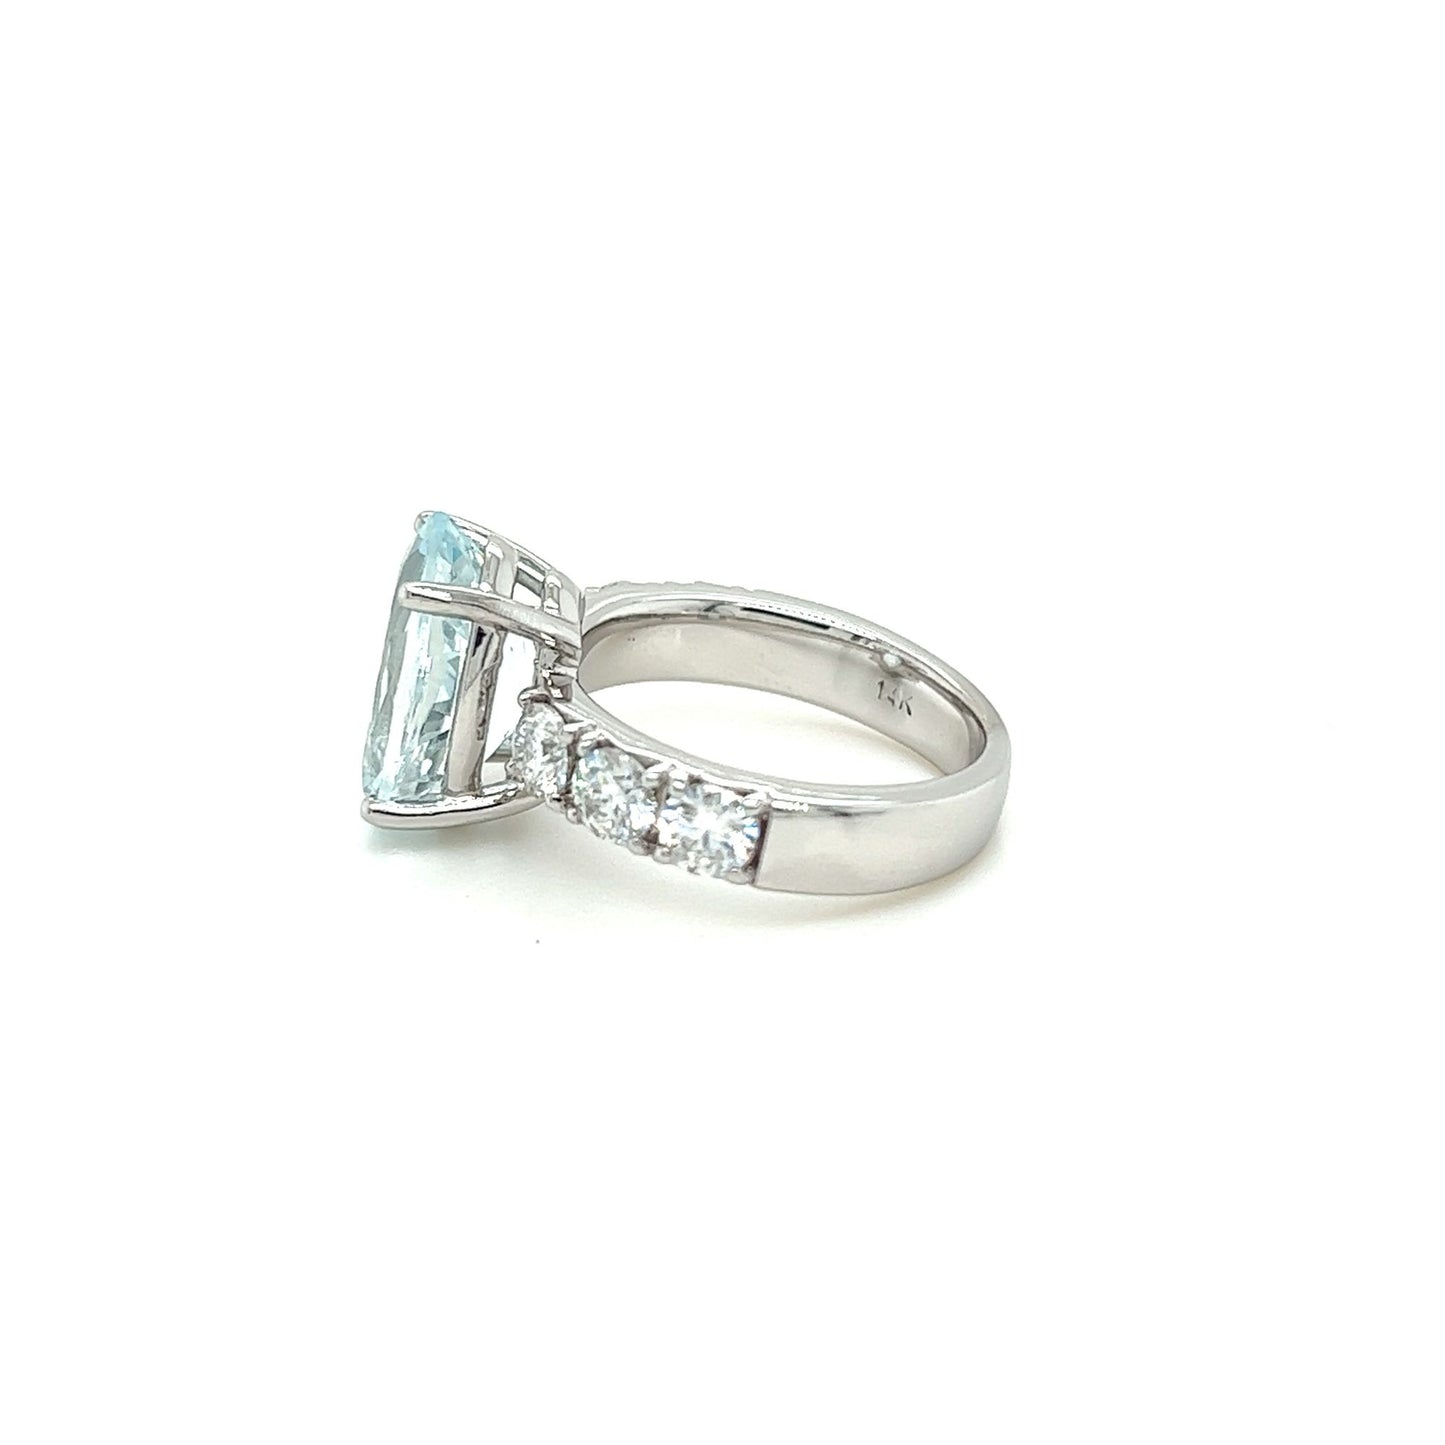 14kt White Gold Aquamarine & Moissanite Ring (Can be sized to fit)